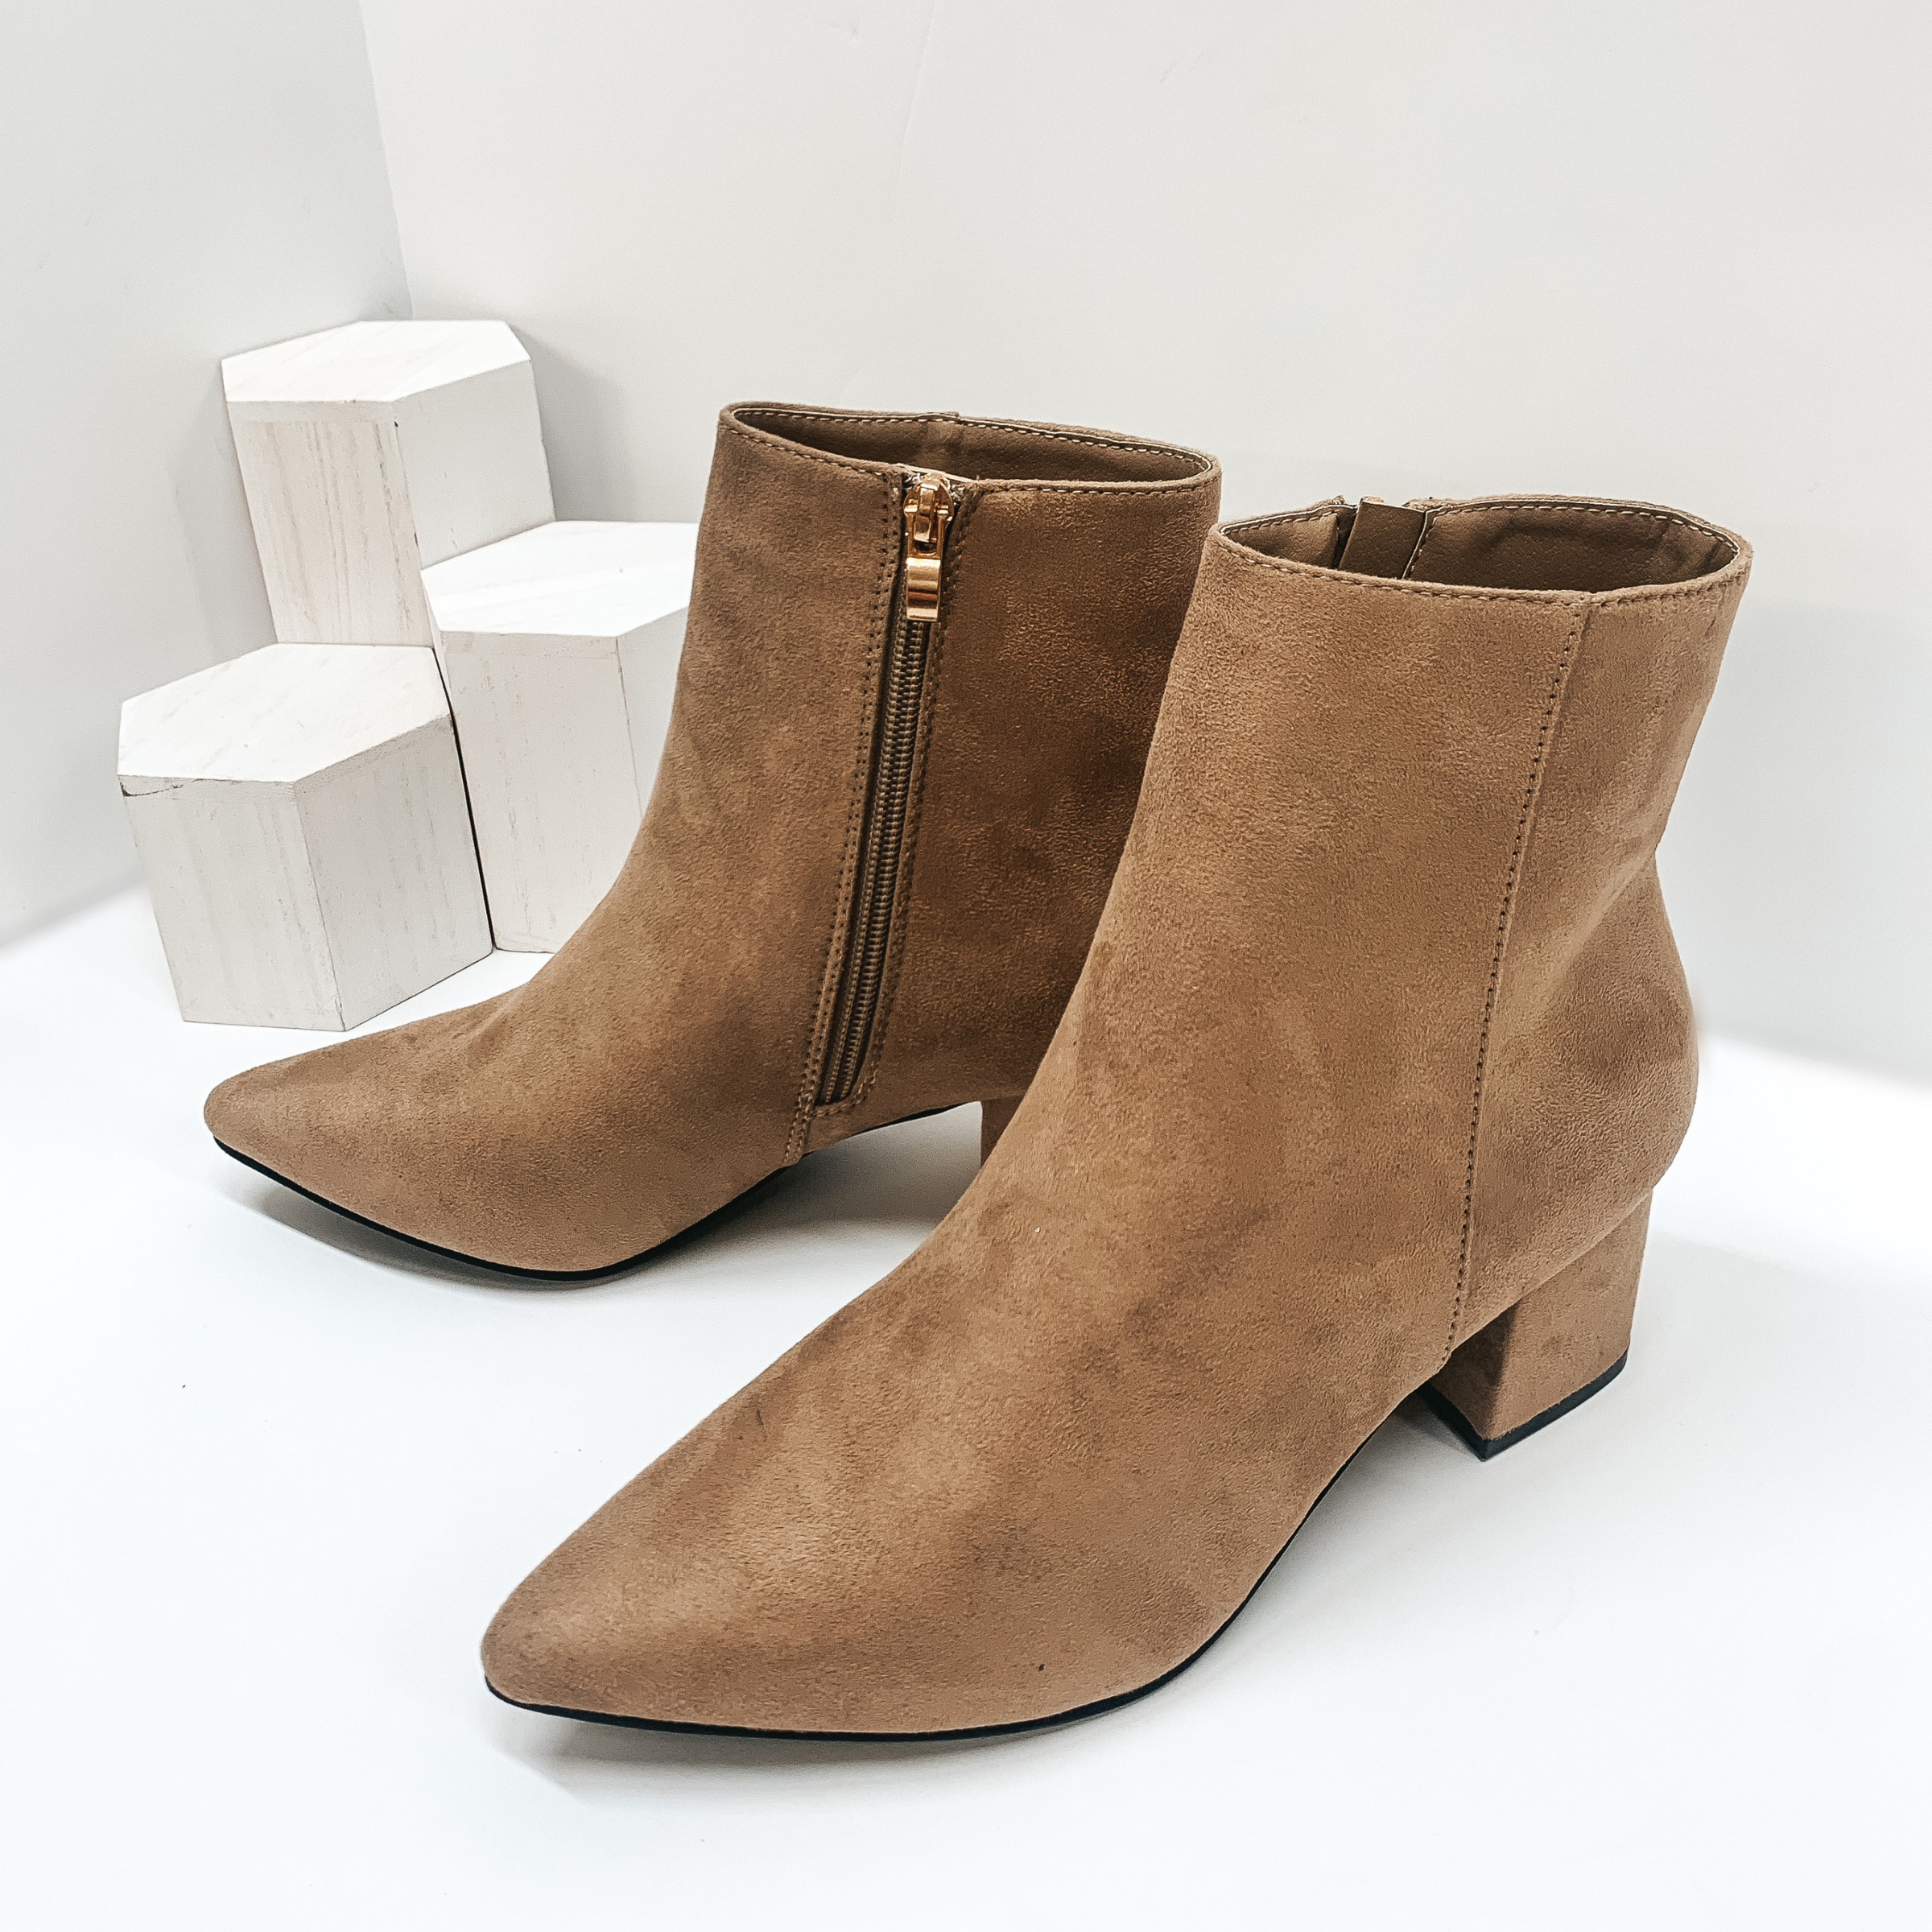 Suede Pointed toe block heel ankle booties with inside ankle zipper closure in taupe. These booties are pictured on a white background with white blocks in the background.